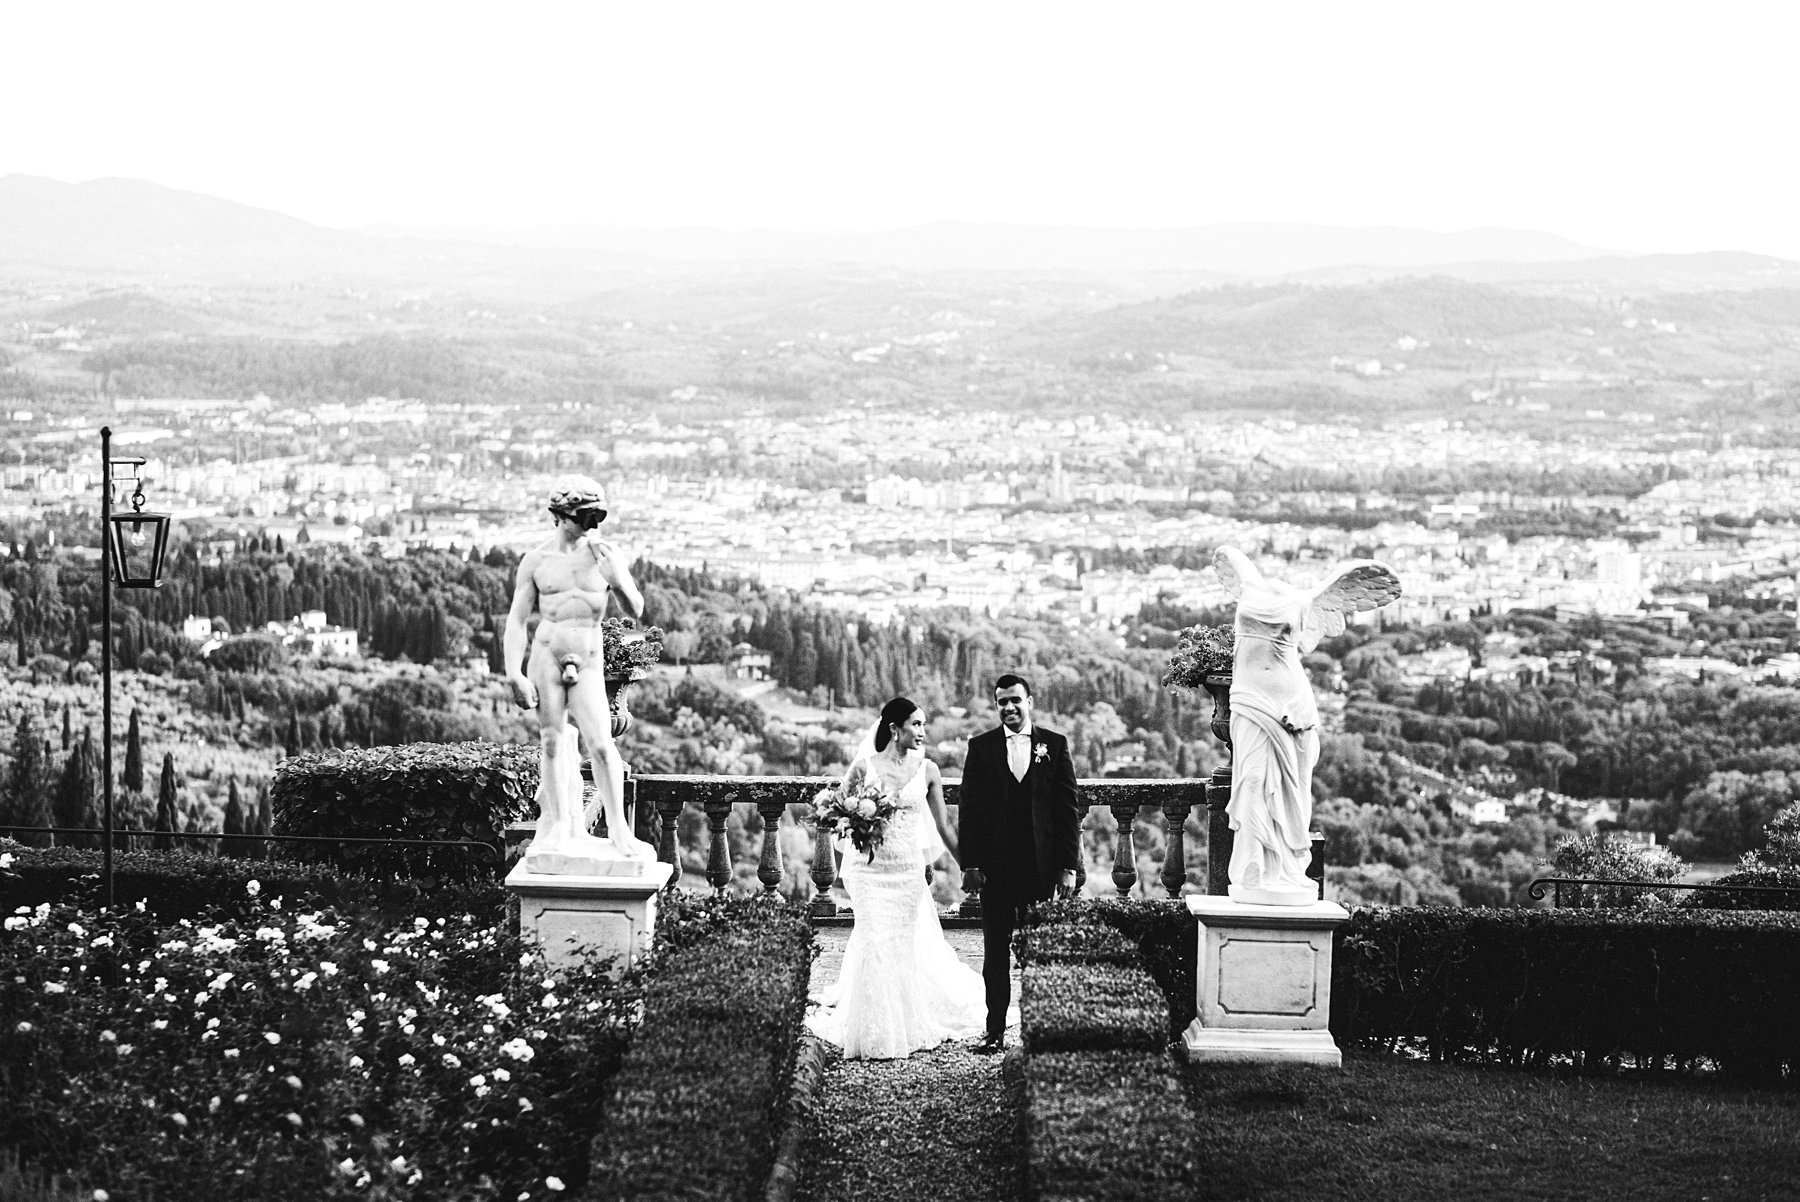 Graceful prewedding sunrise photos in Florence and intimate wedding in Italy at the incredible Belmond Villa San Michele. When you choose to have an intimate wedding in Italy, you might as well enjoy it at the fullest even before the big day itself. How? For example shooting dreamy sunrise photos to celebrate your engagement, and then saying “I do” in a breathtaking location right out of Florence. This is what Liza and Justin did. Bridal gown by Martina Liana